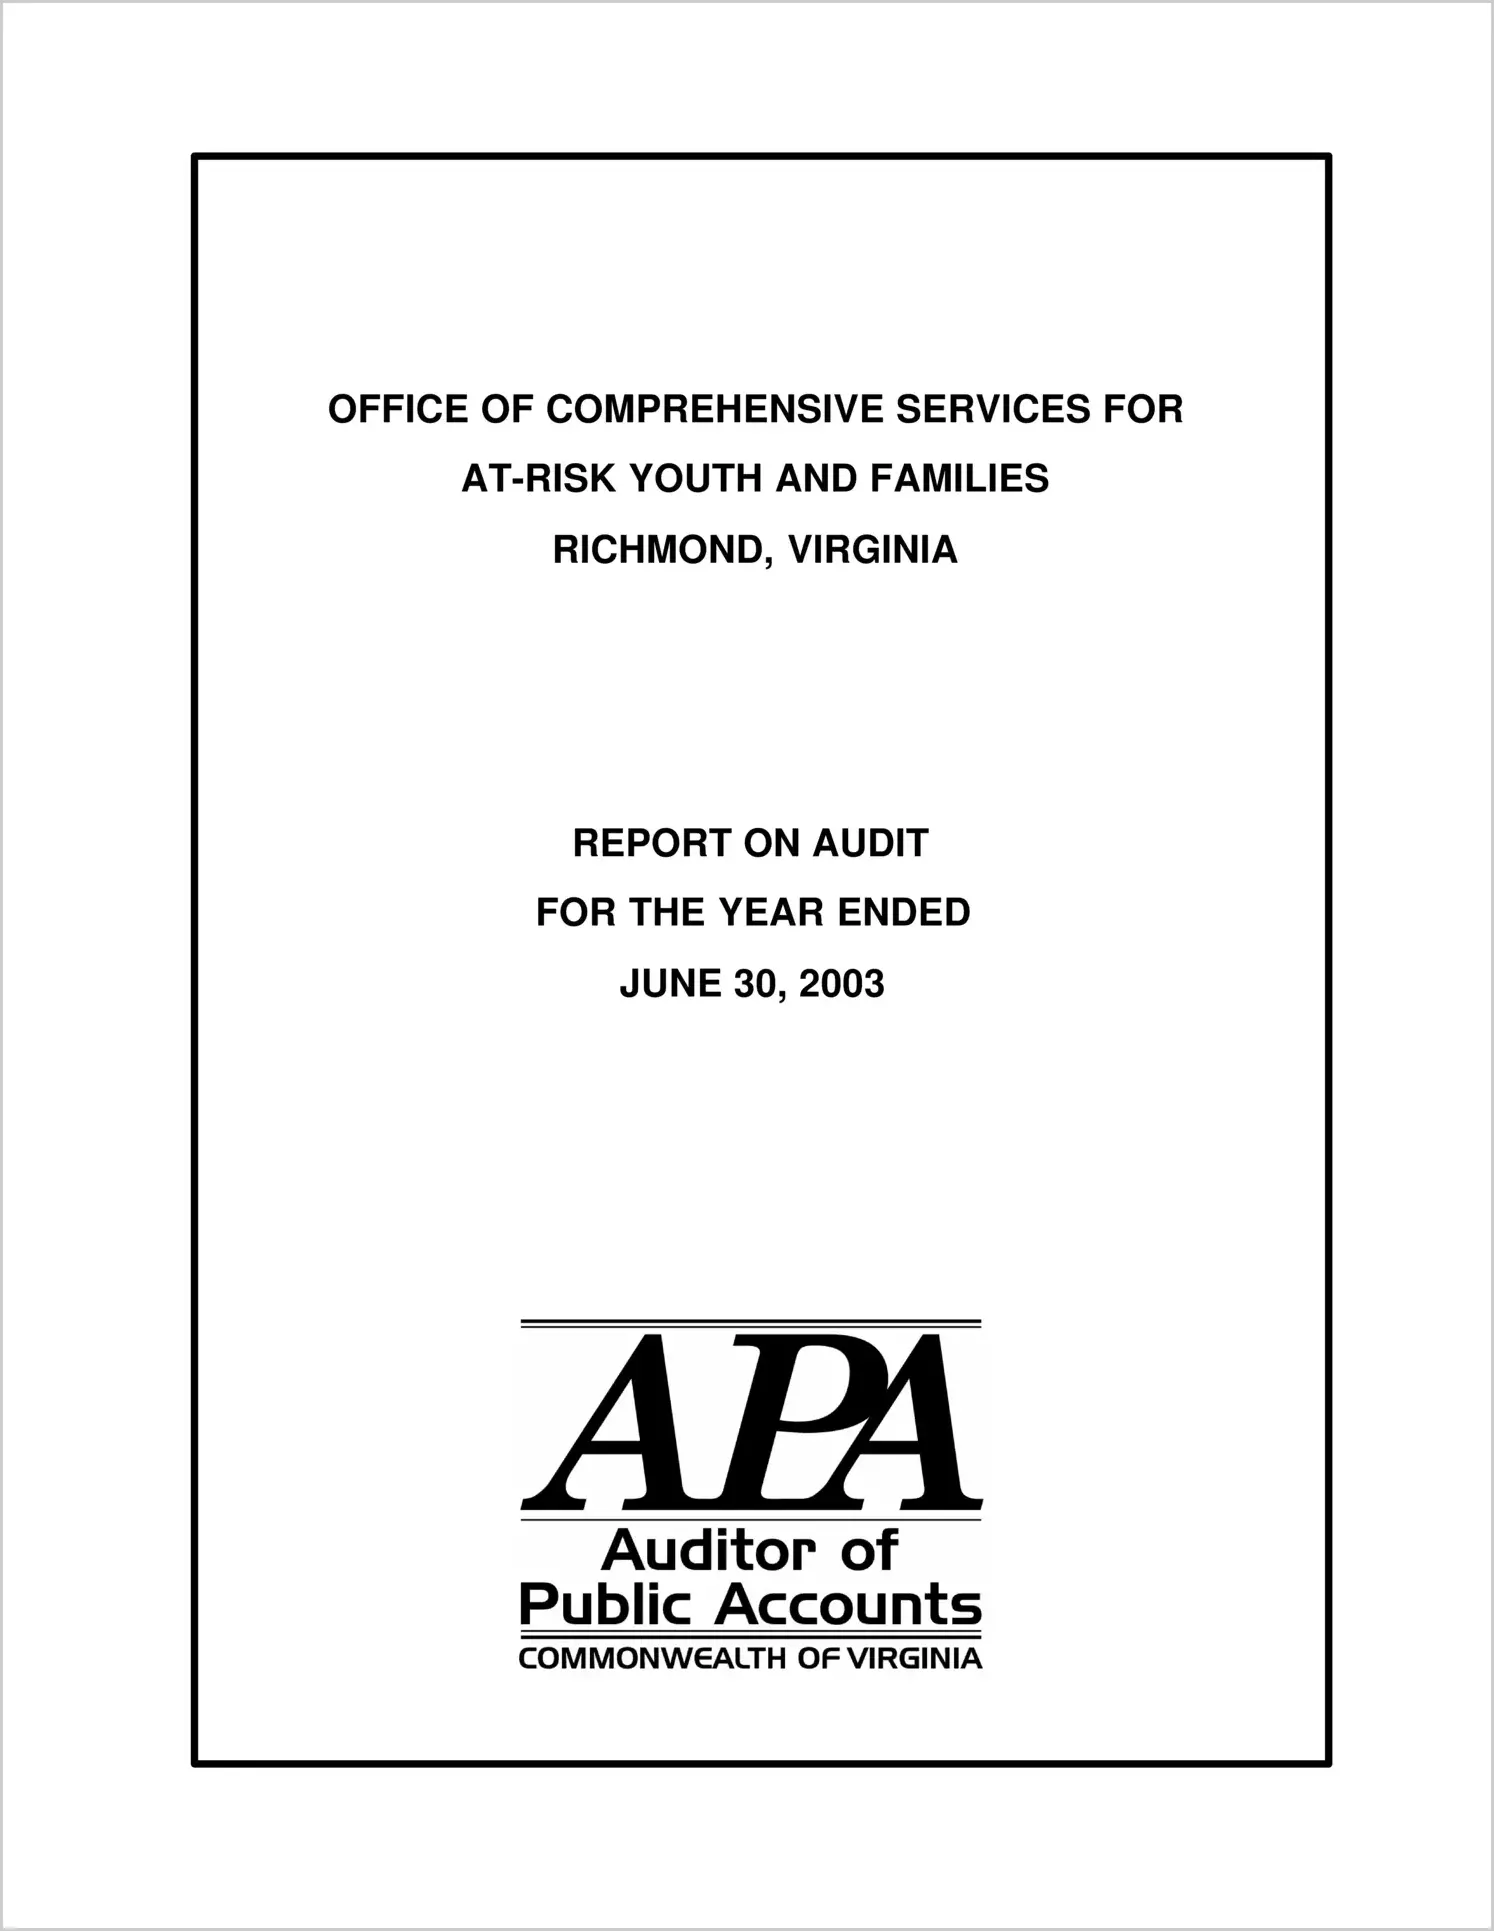 Office of Comprehensive Services for At-Risk Youth and Families for the year ended June 30, 2003